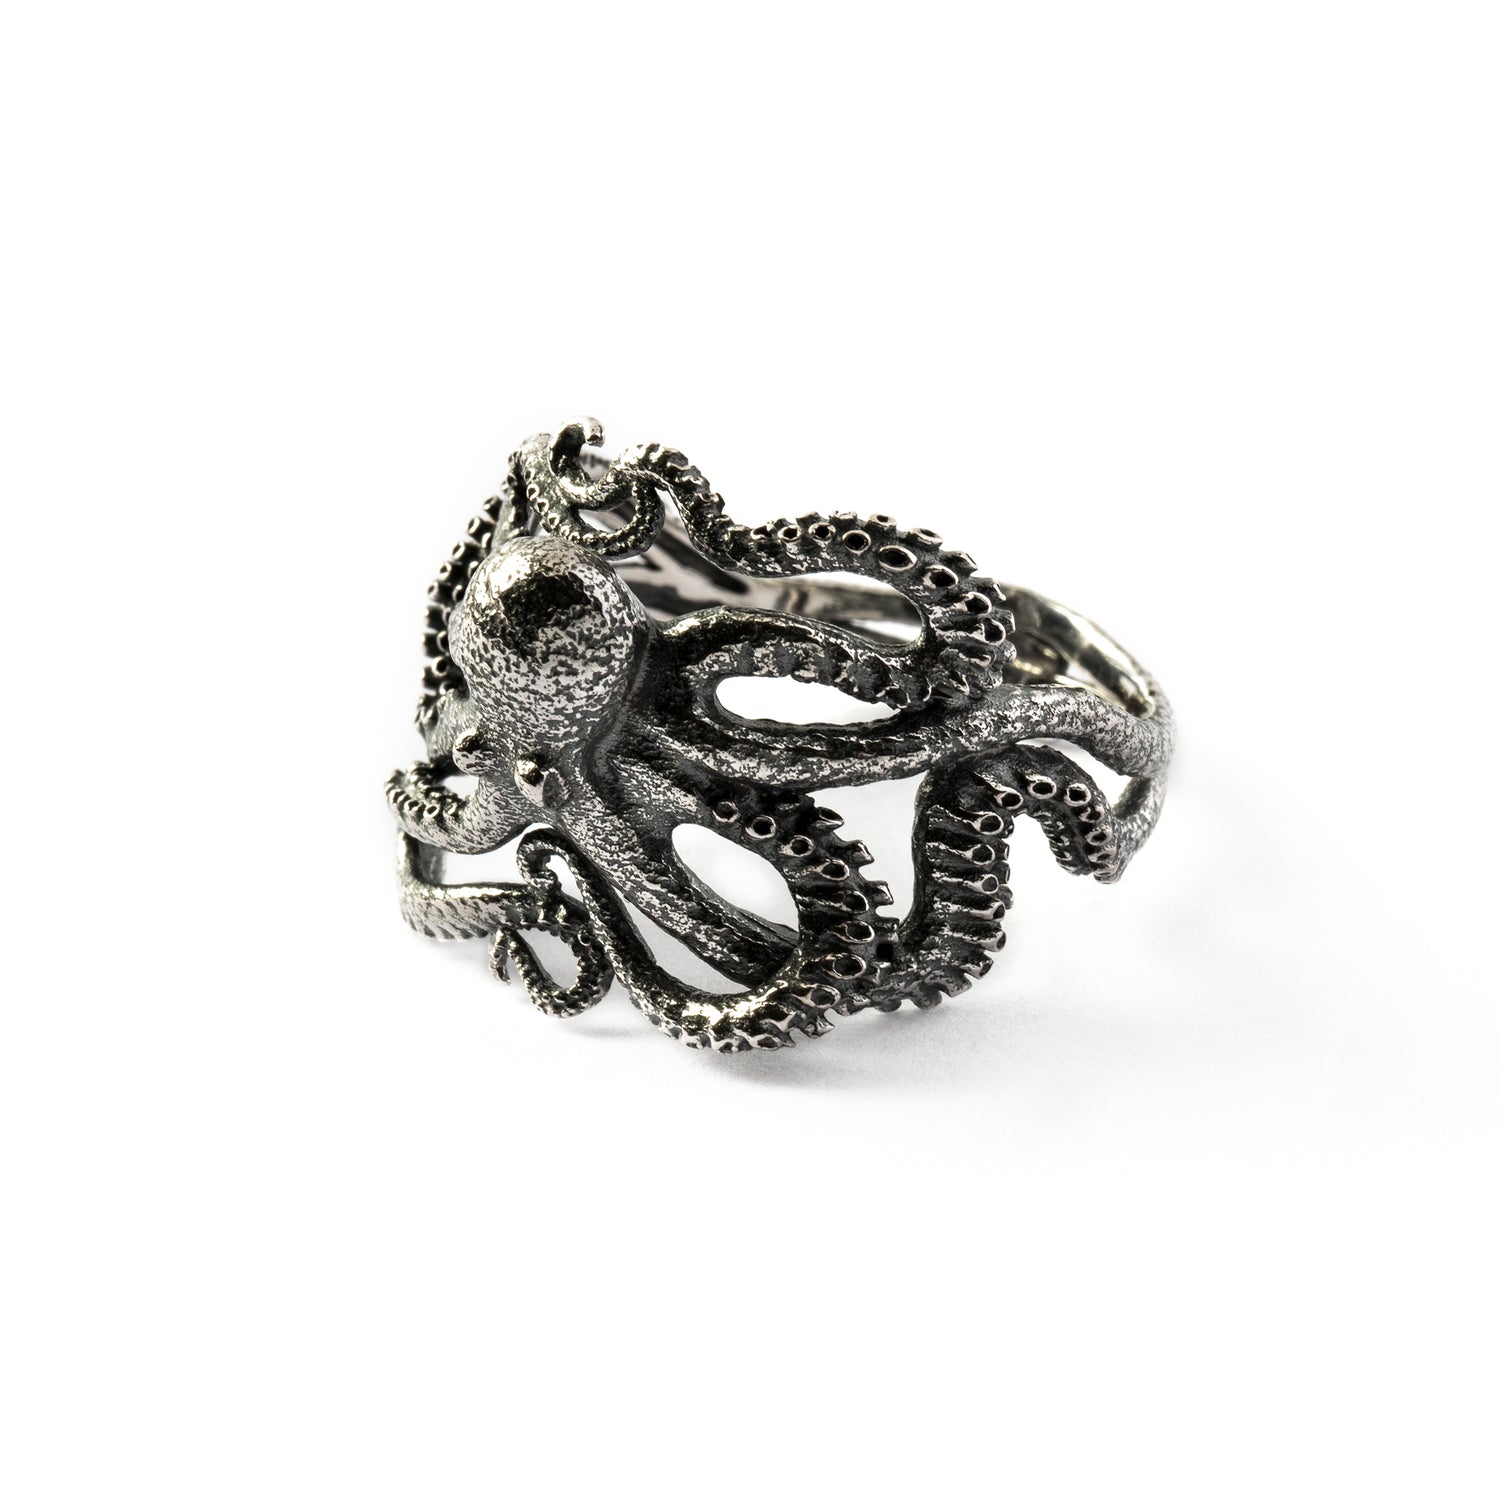 Octopus Silver Ring right side view